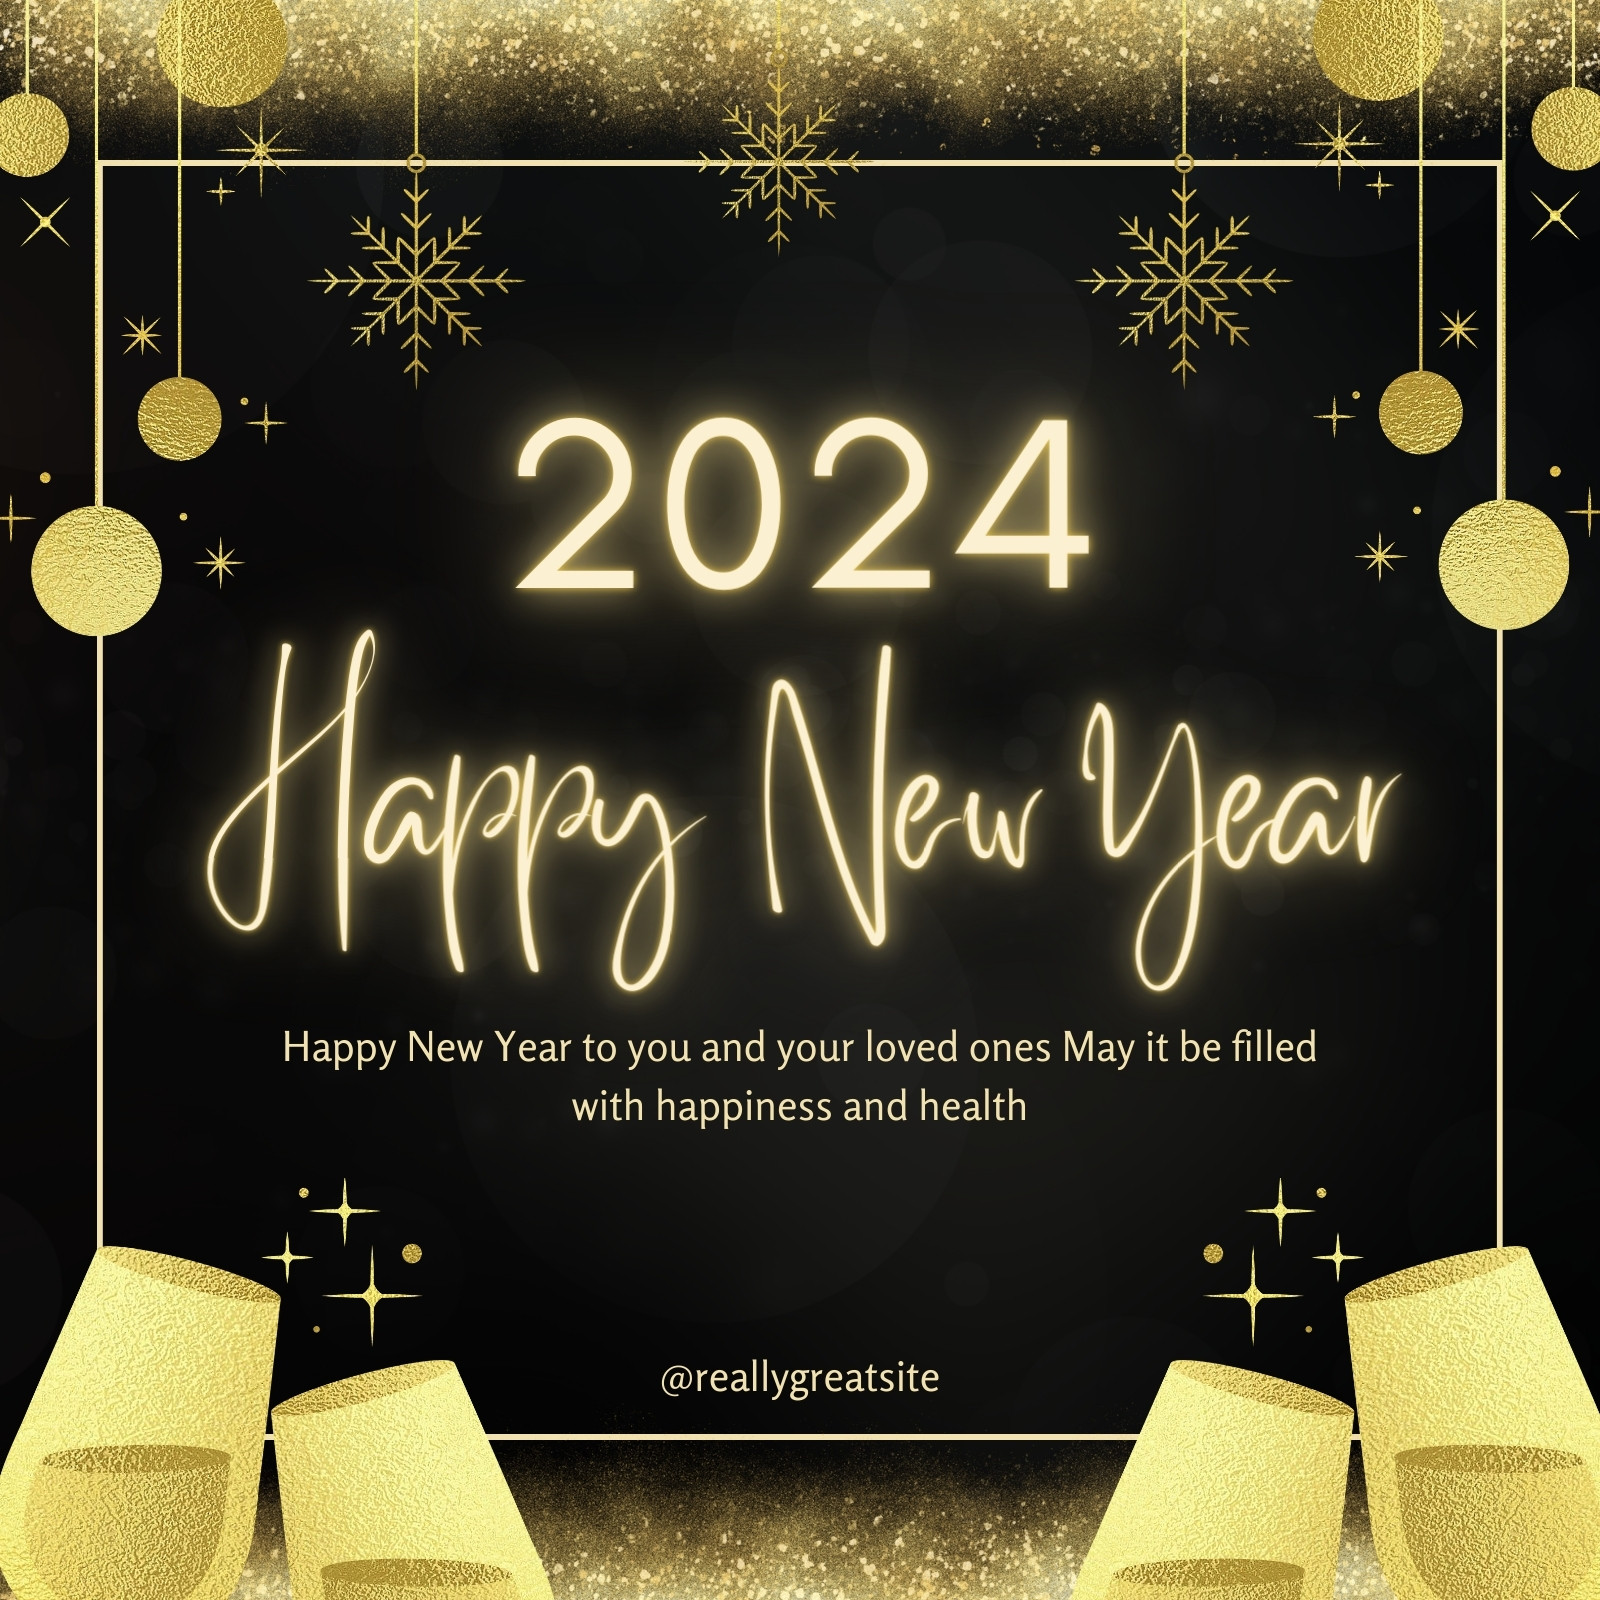 Happy New Year 2024 Wishes for Your Loved Ones